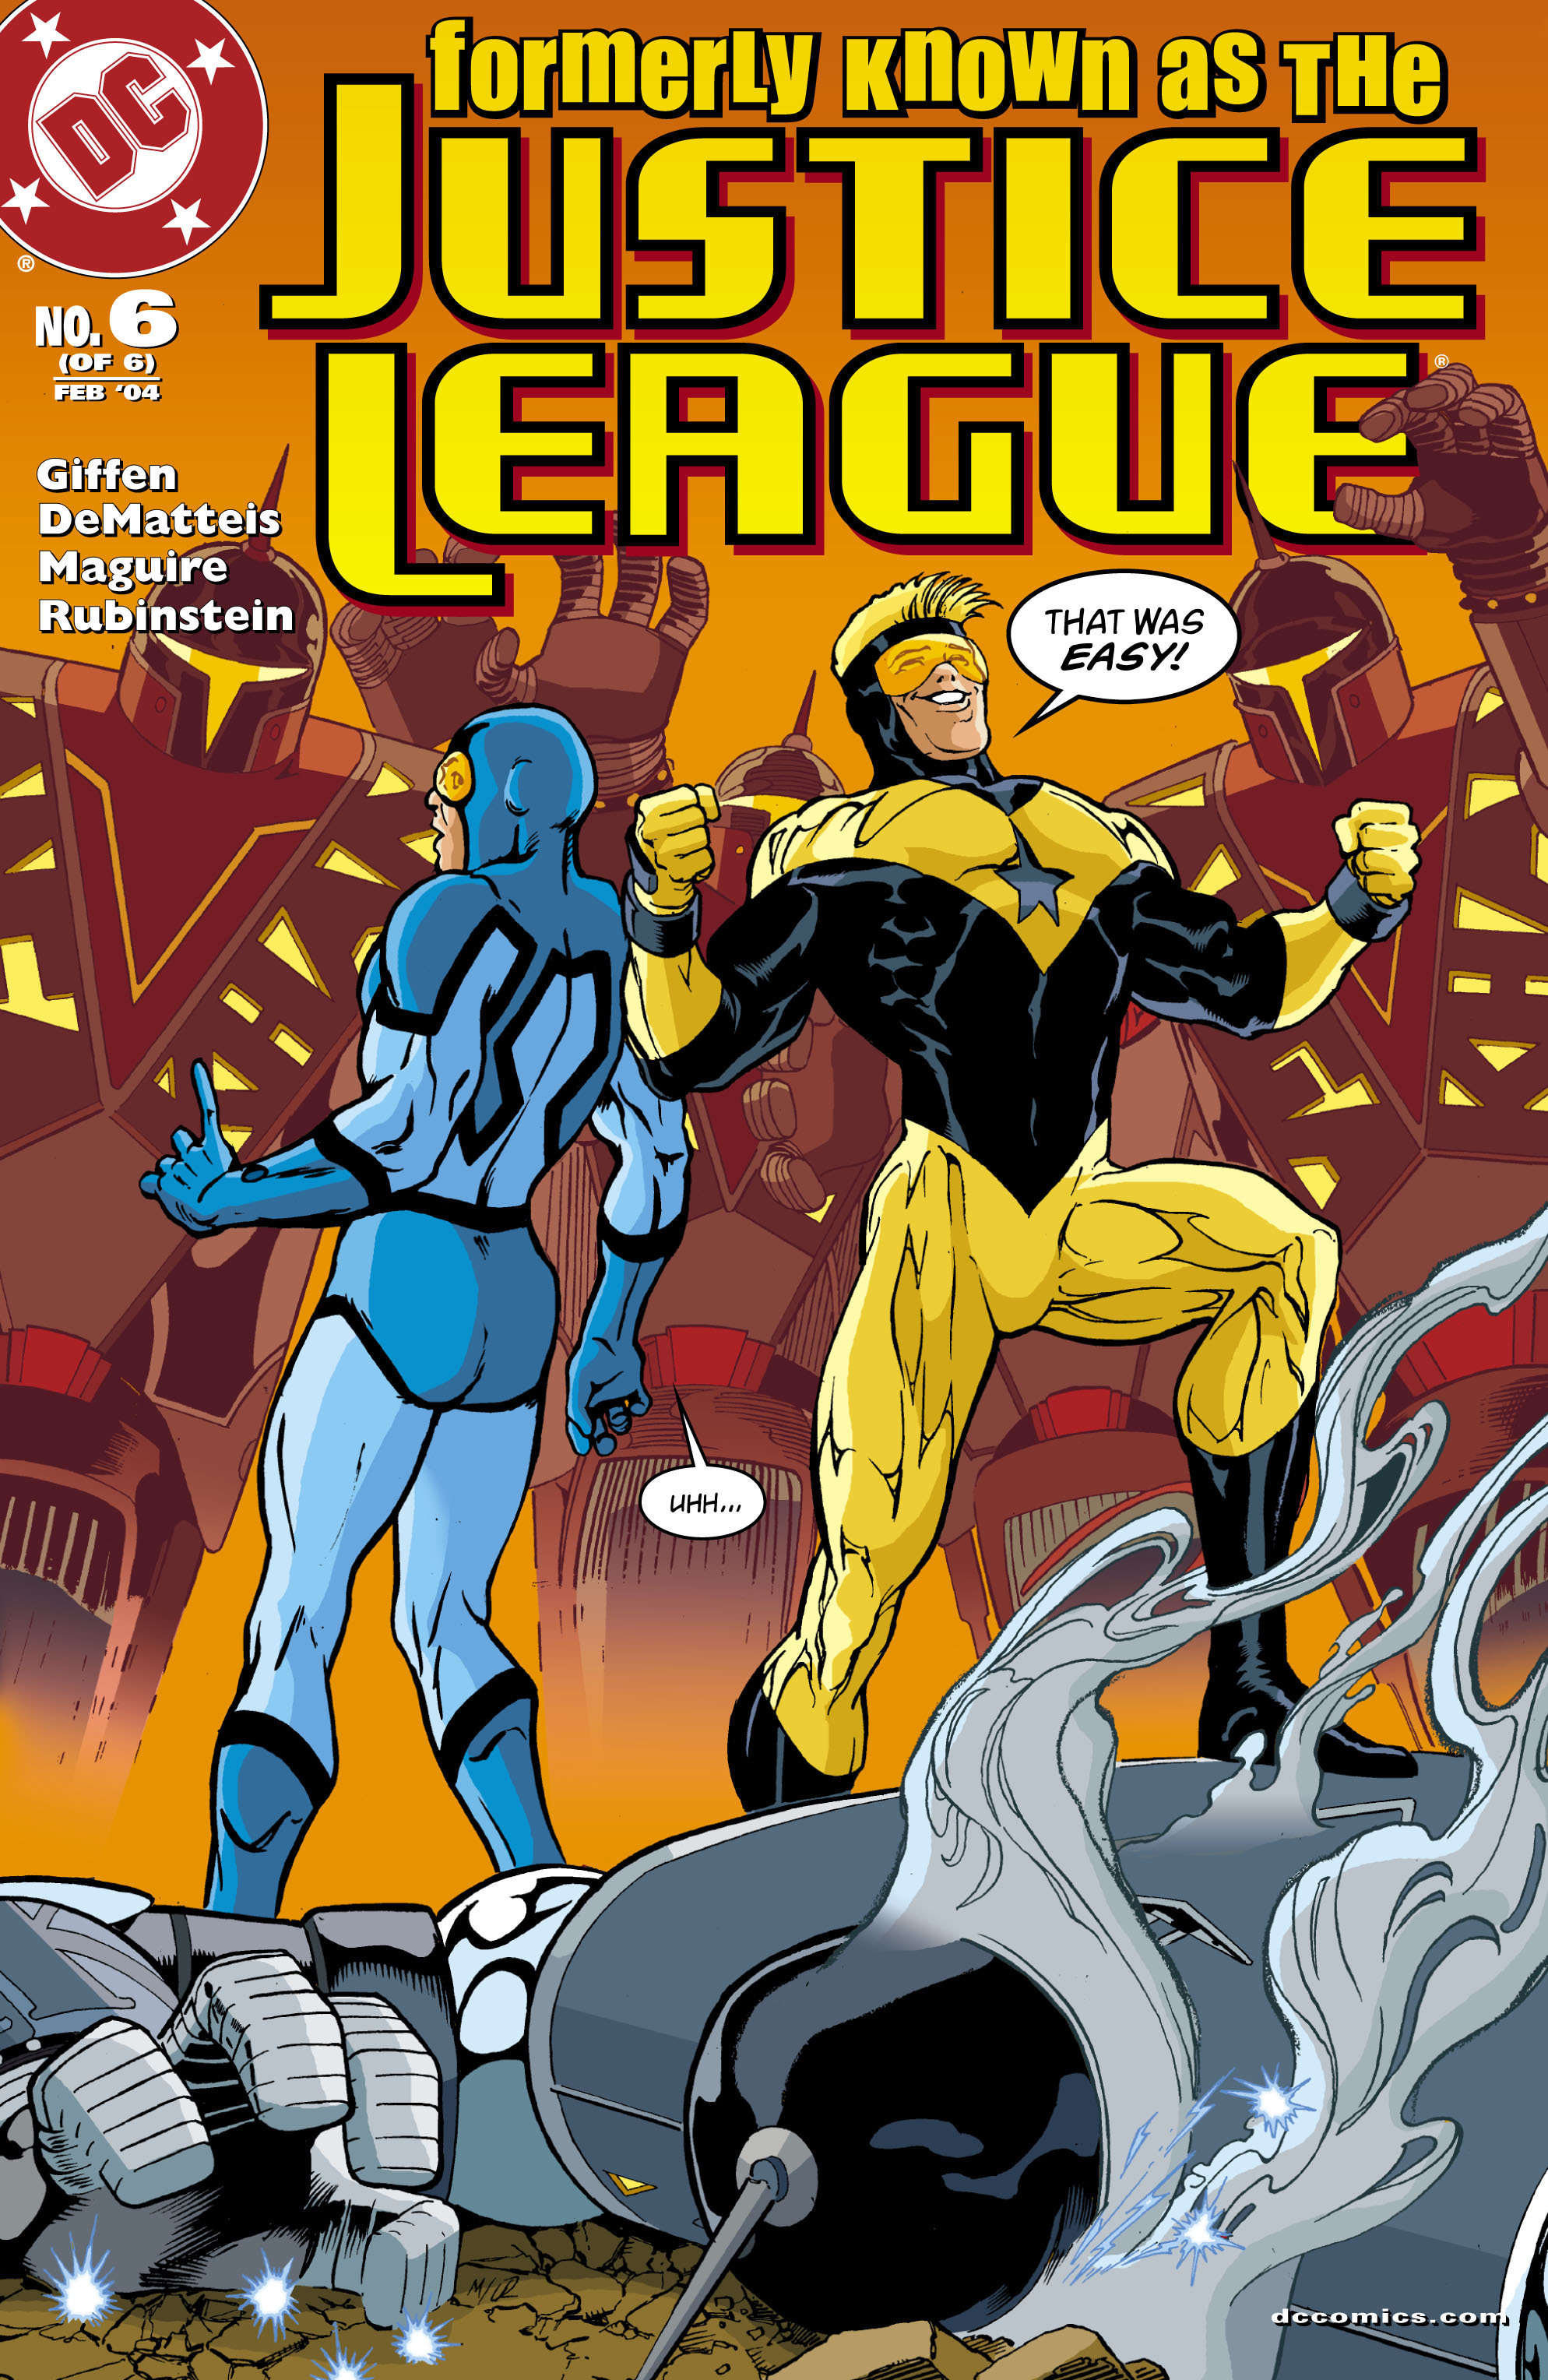 Read online Formerly Known as the Justice League comic -  Issue #6 - 1